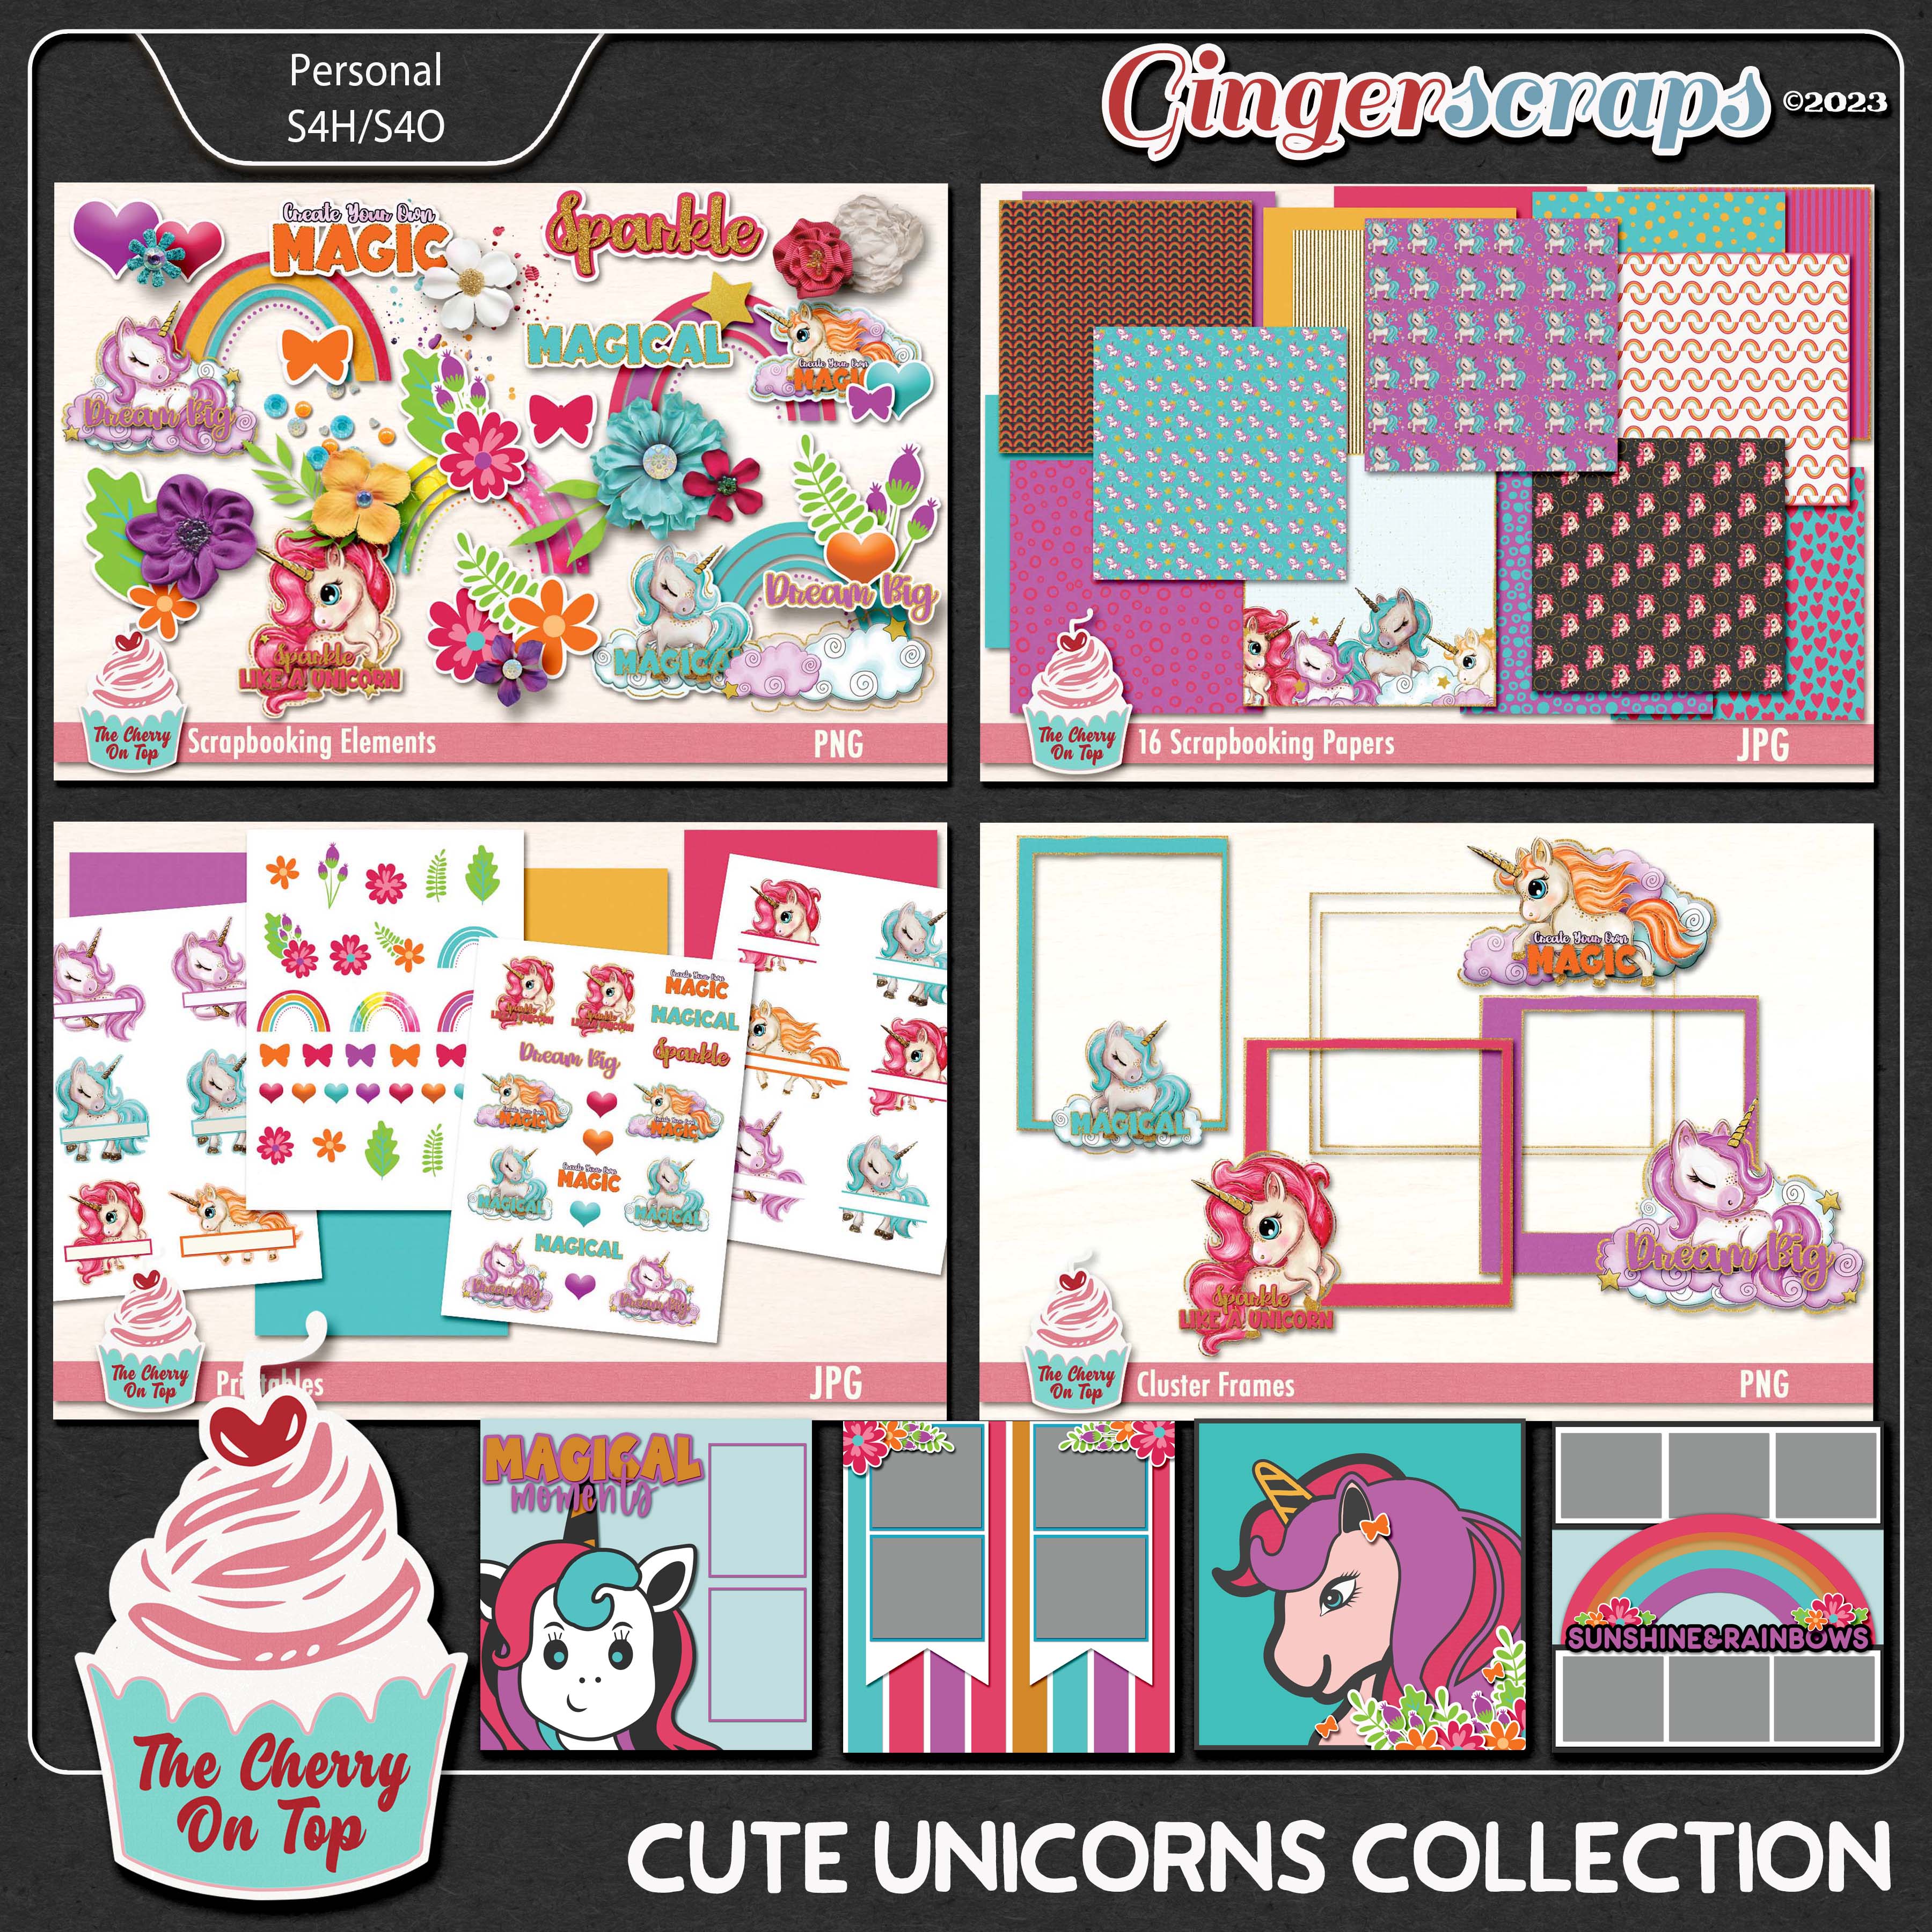 Cute Unicorns Digital Scrapbooking Collection with Printables Kit and Templates